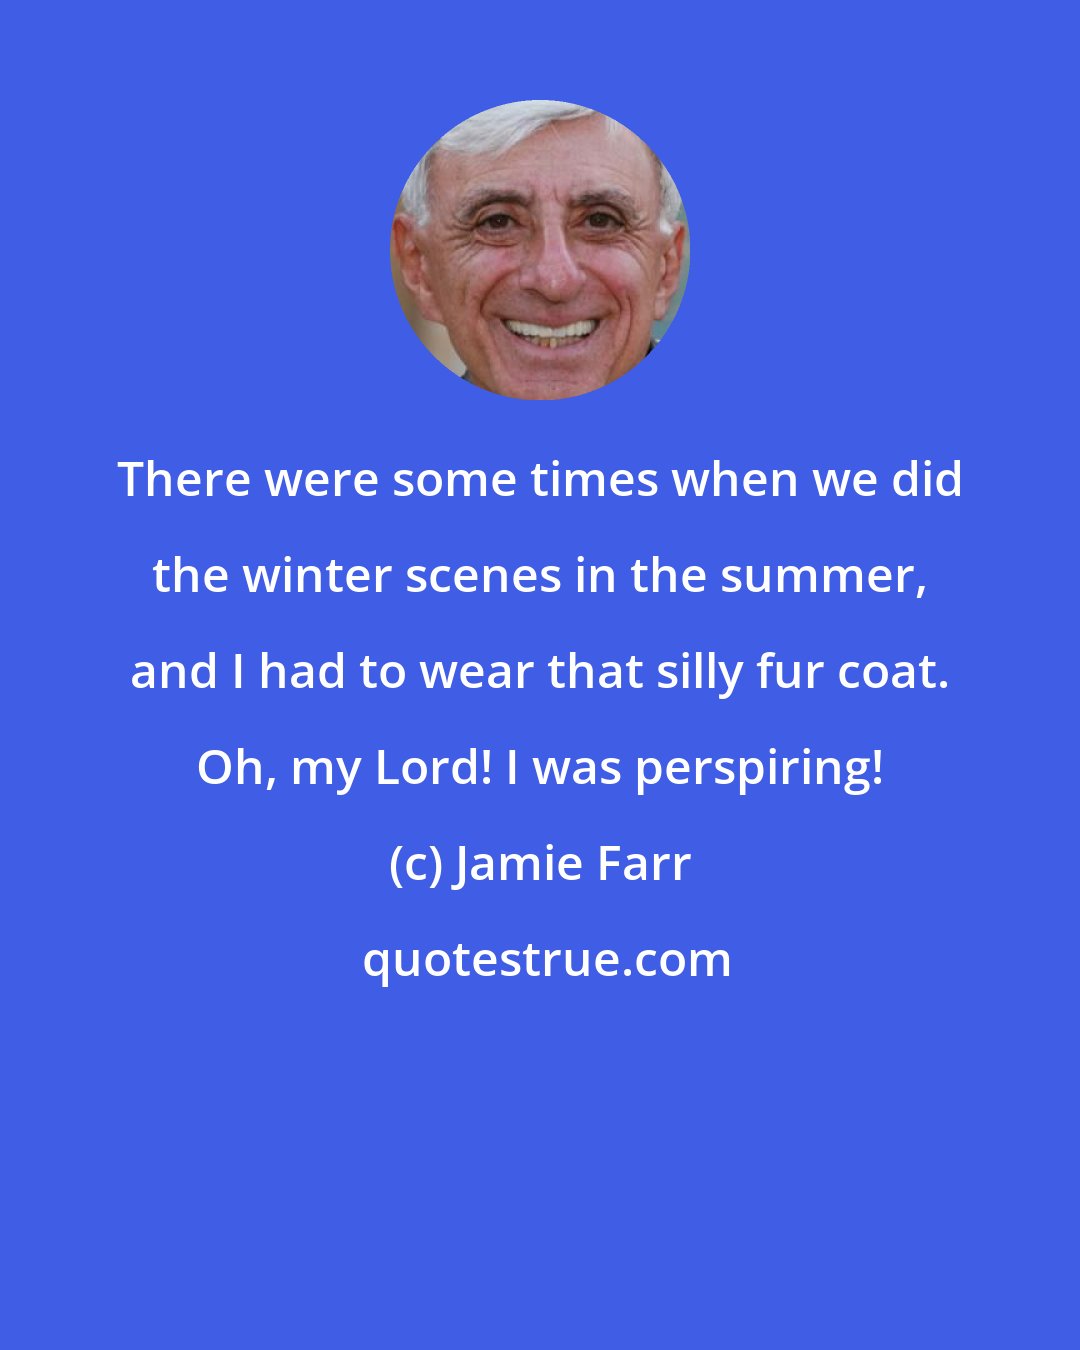 Jamie Farr: There were some times when we did the winter scenes in the summer, and I had to wear that silly fur coat. Oh, my Lord! I was perspiring!